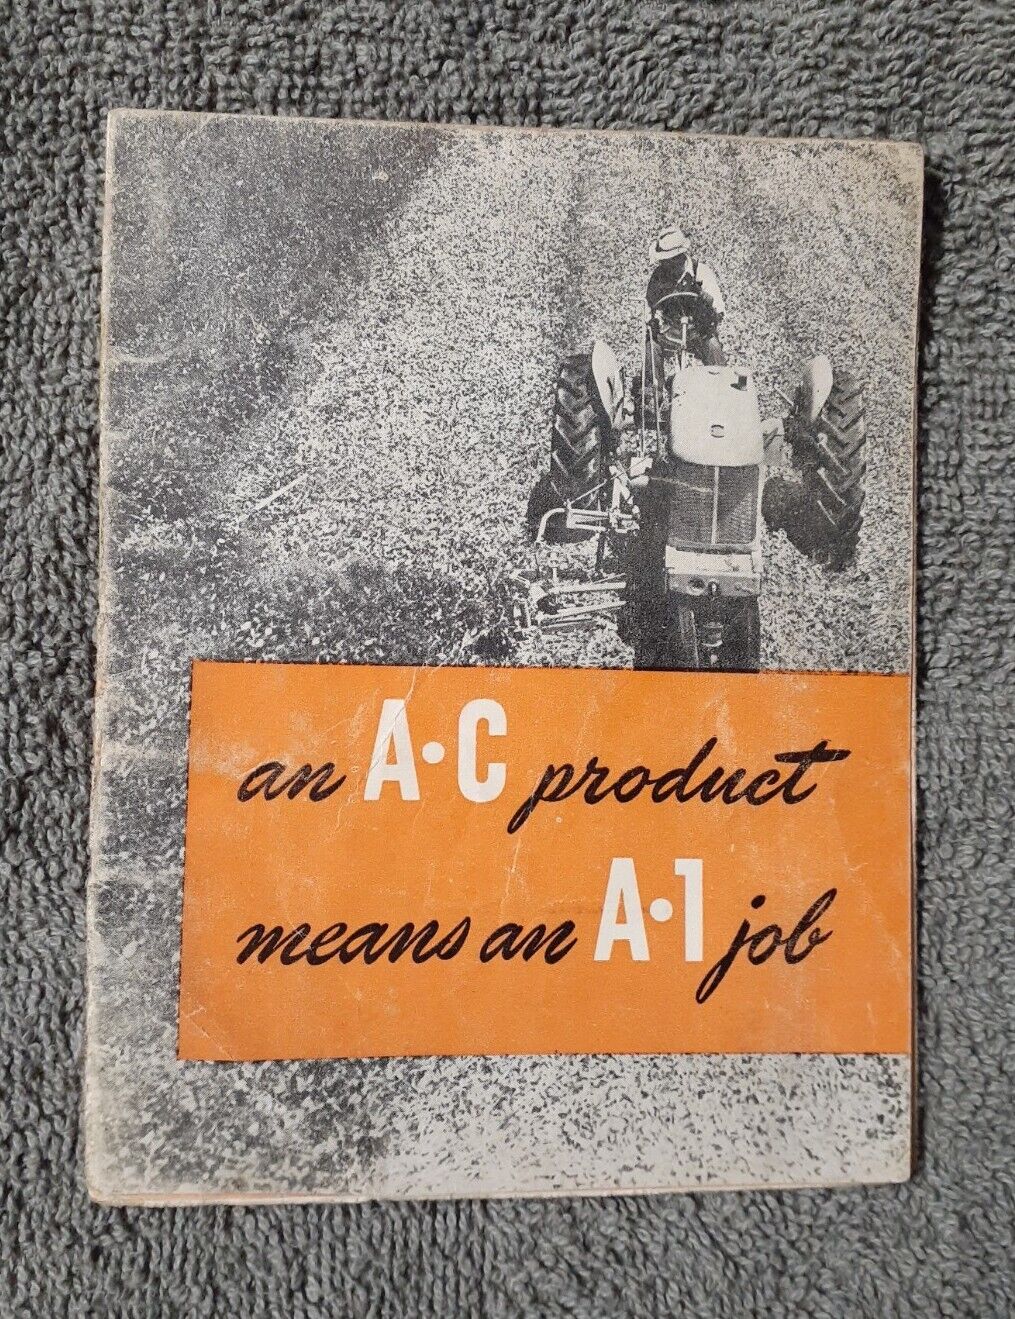 Allis Chalmers Implements Fold-Out Brochure